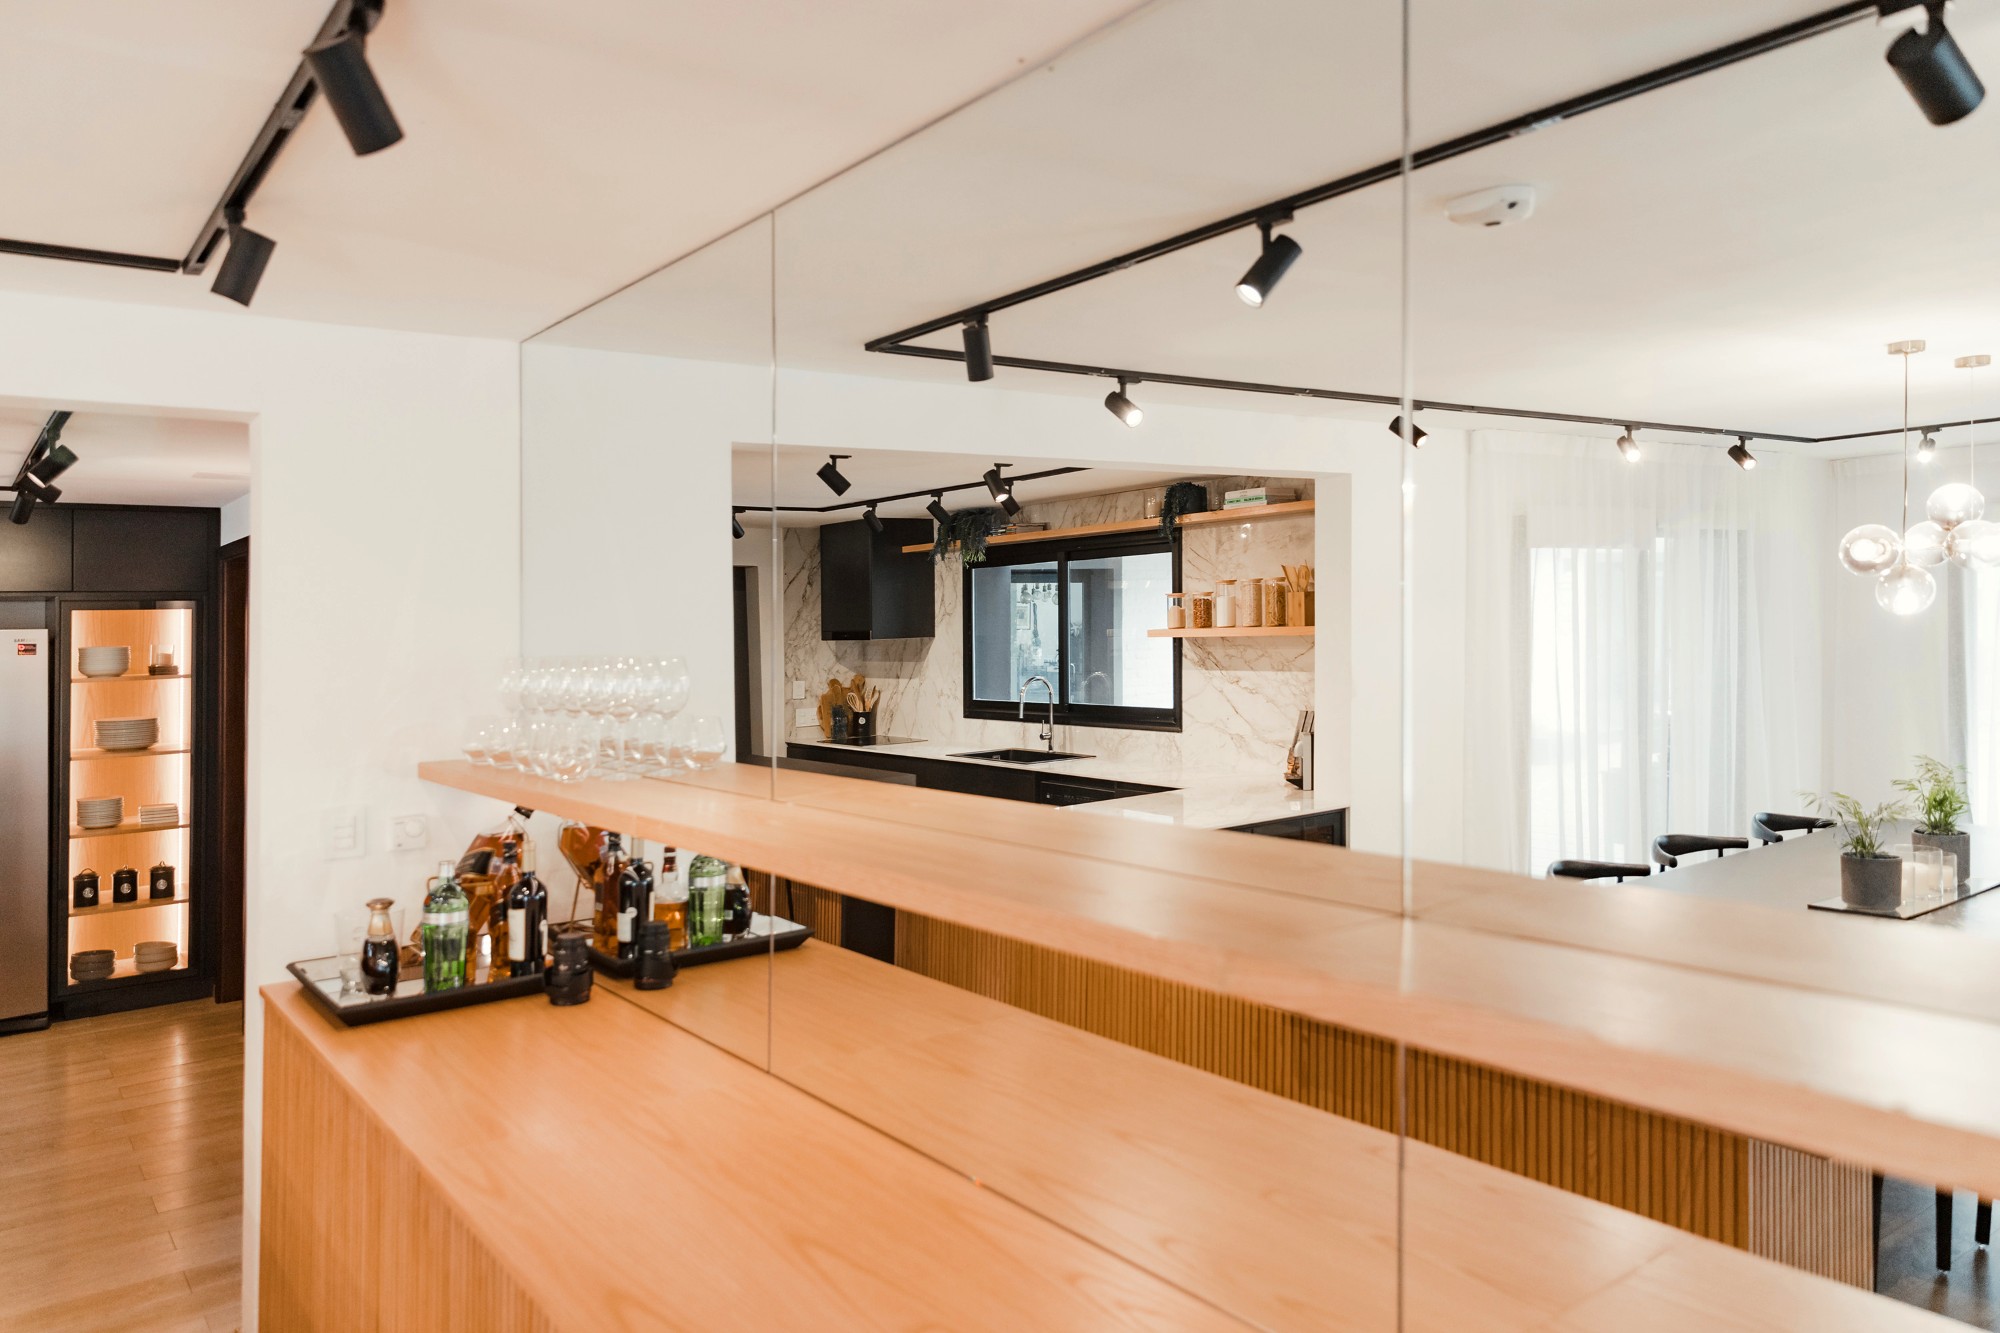 Image of IMG 6677 in Kitchen and dining room merged by a precise design - Cosentino